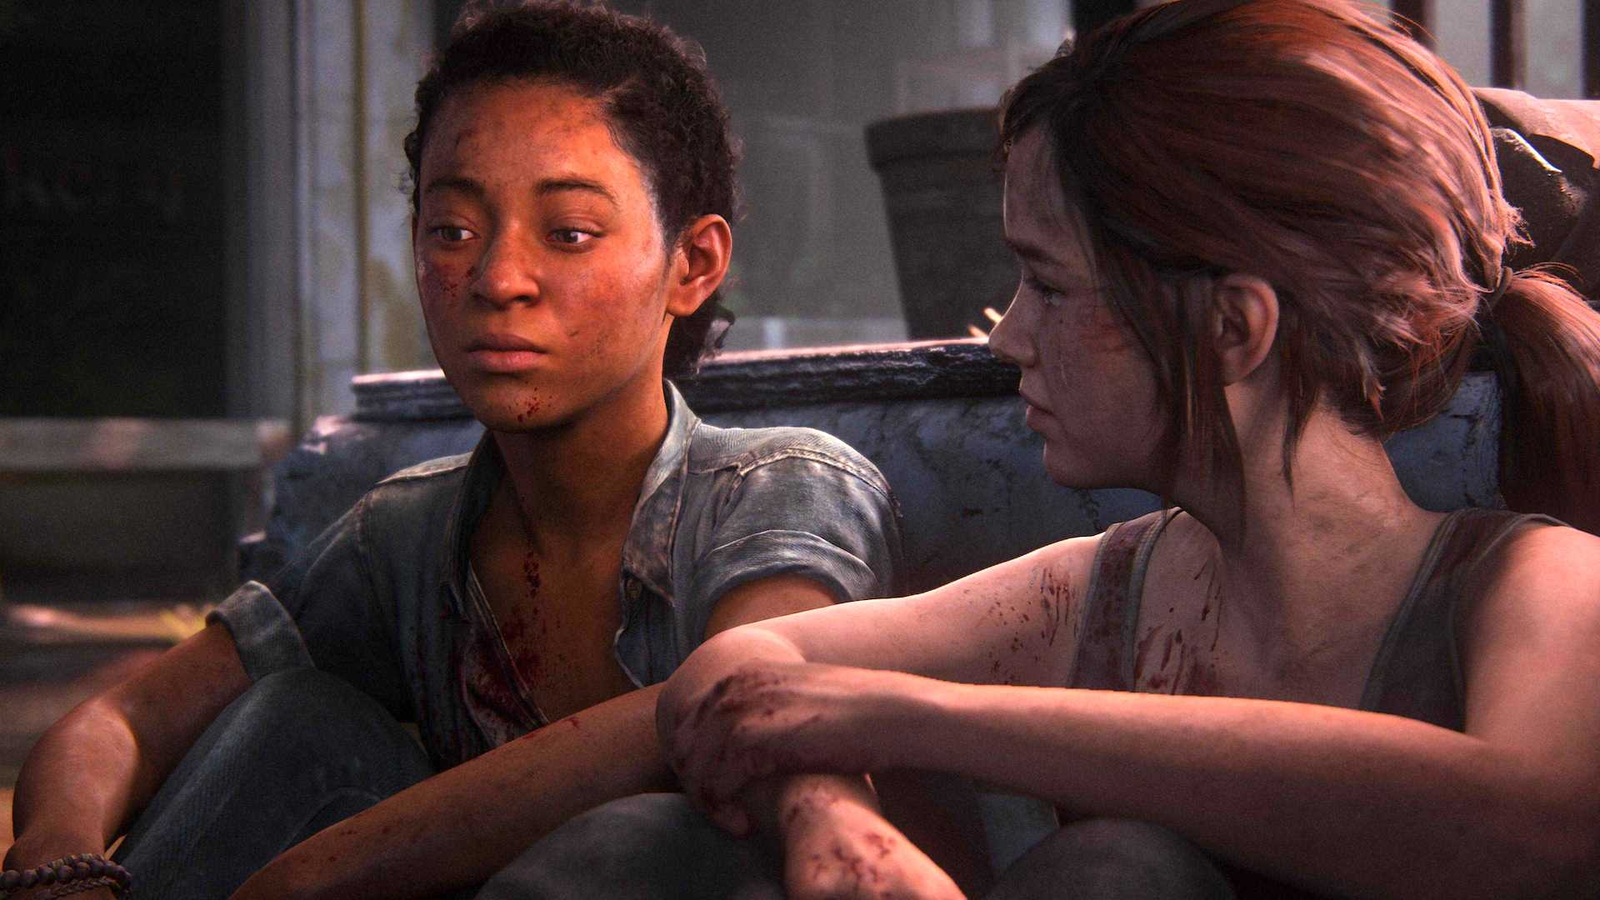 Guide for The Last of Us Remastered - Walkthrough Overview